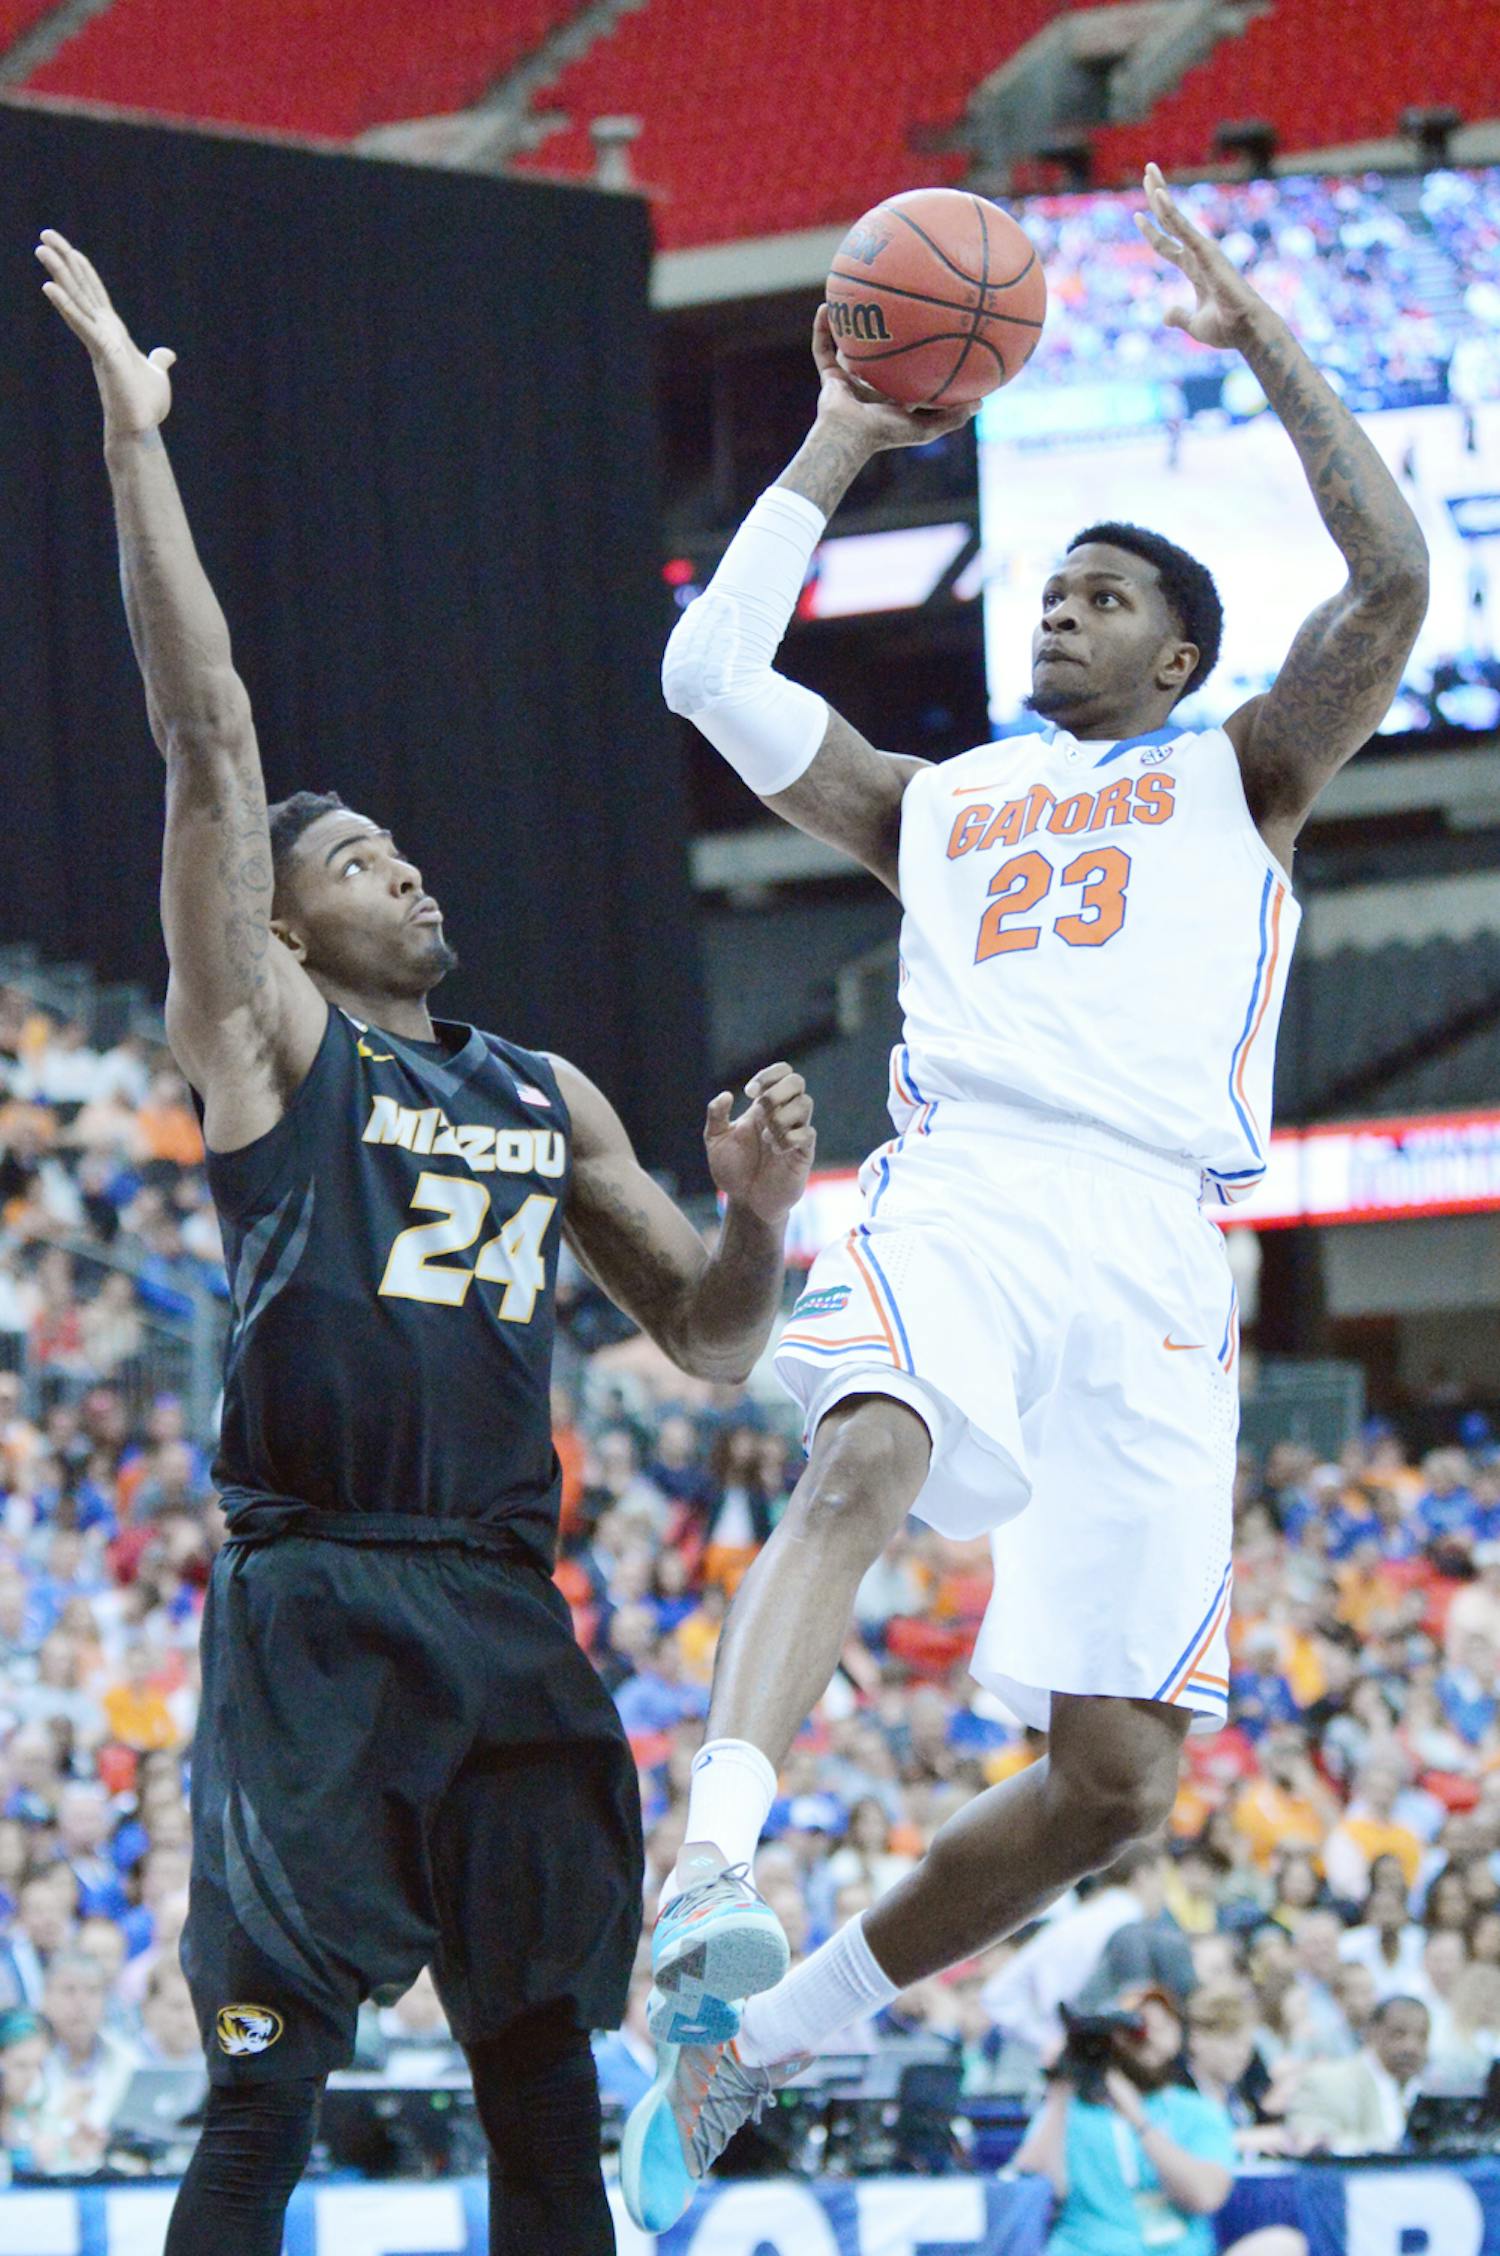 Chris Walker attempts a layup during Florida’s 72-49 win against Missouri on March 14 in the Georgia Dome in Atlanta.